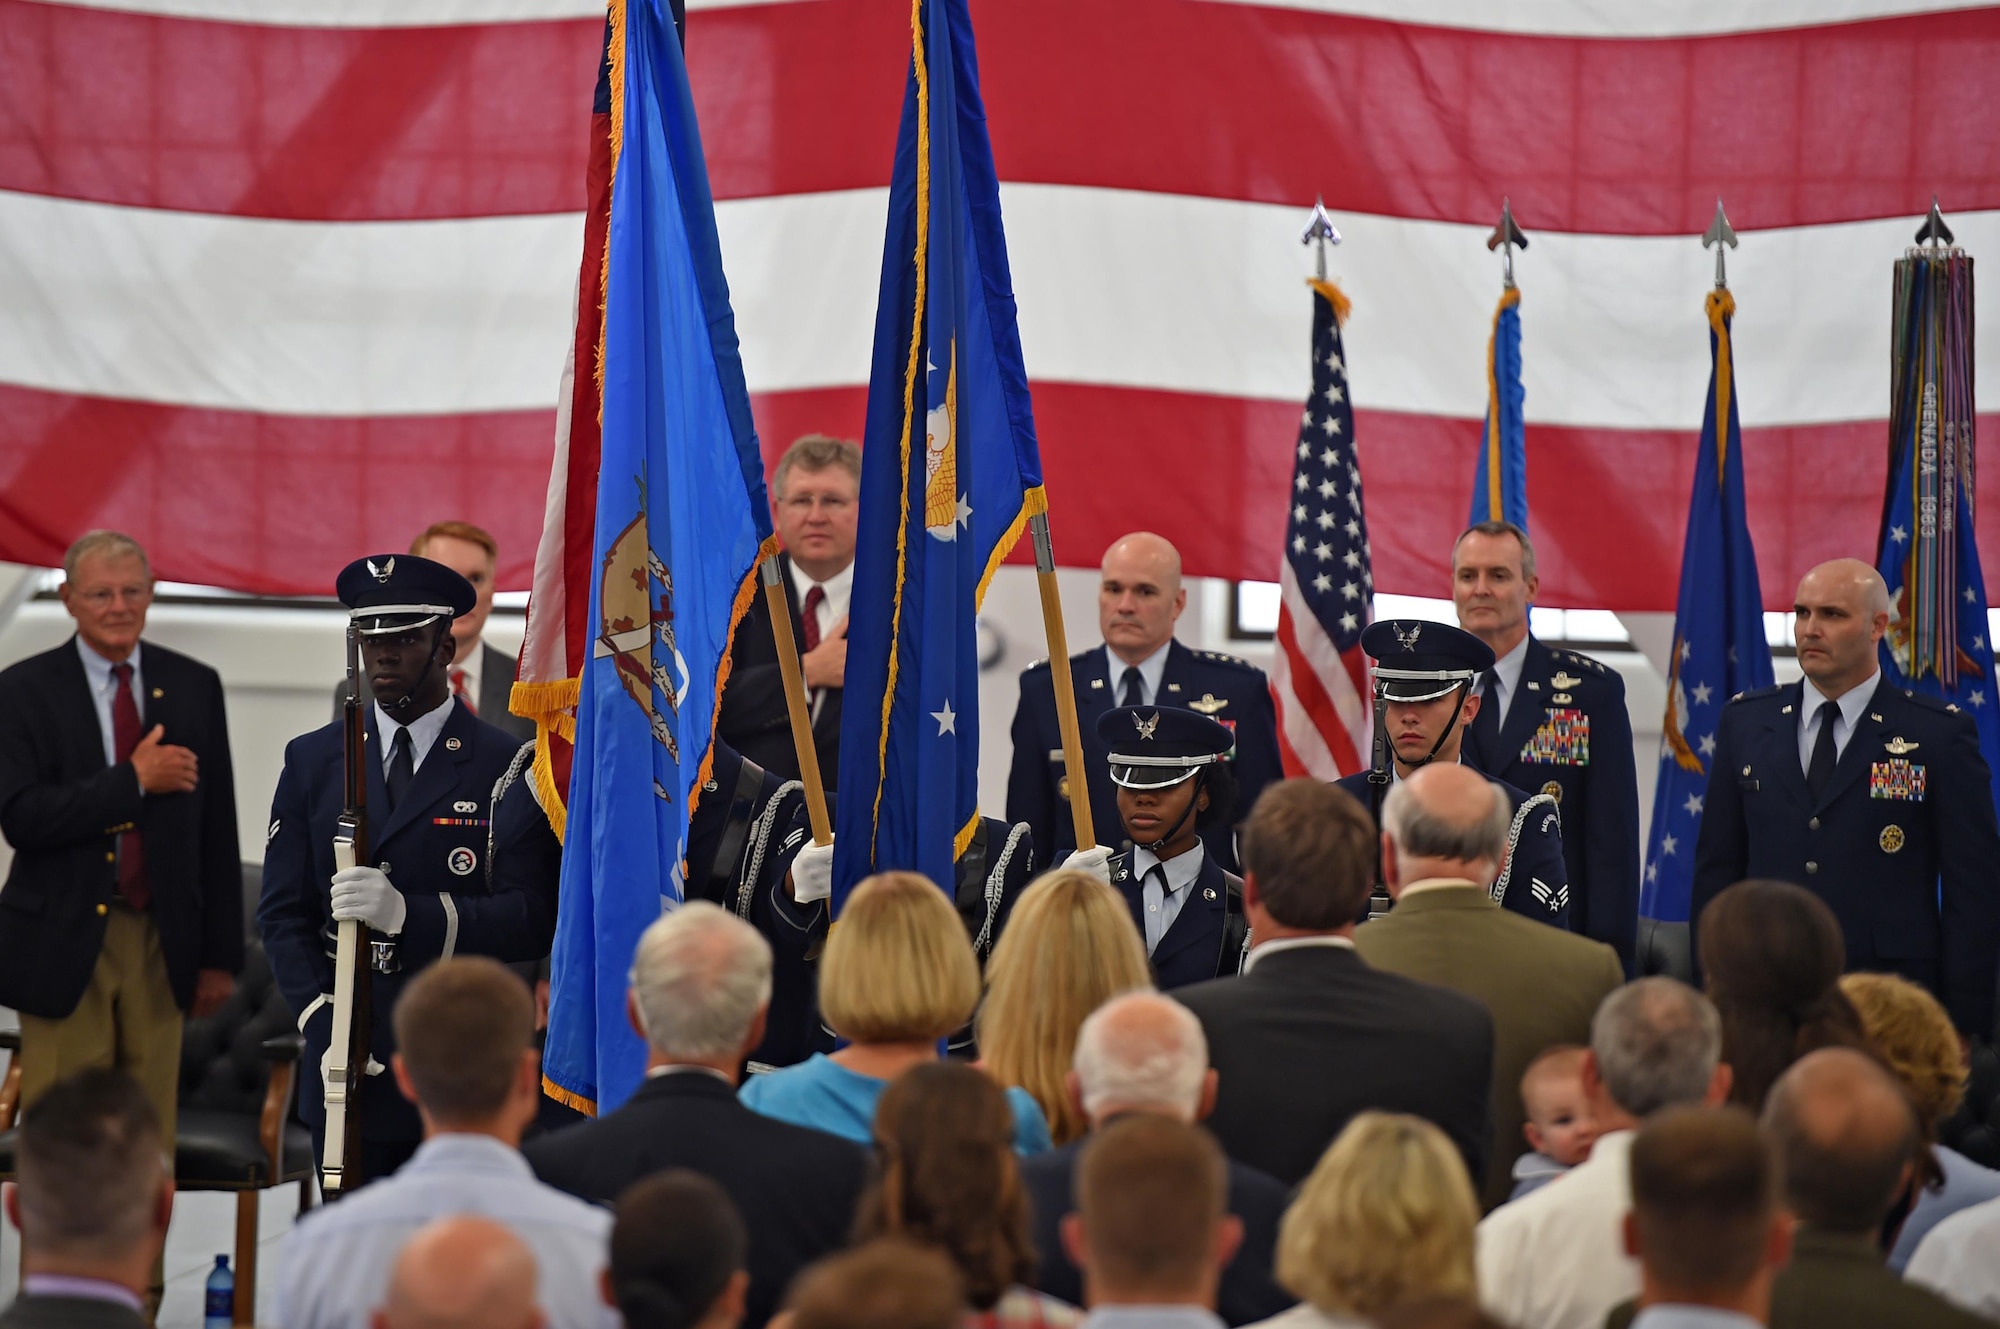 ALTUS AIR FORCE BASE, Okla. – Members of the Altus Air Force Base Blue Knights Honor Guard present the colors during the “Forging the 46” ceremony, Aug. 30, 2016, at Altus AFB, Okla. The event consisted of an assumption of command for the reactivated 56th Air Refueling Squadron, dedication of the new KC-46 training facility, speeches from key Air Force and community leaders and concluded with a tour of the new facility for attendees. (U.S. Air Force photo by Senior Airman Dillon Davis)